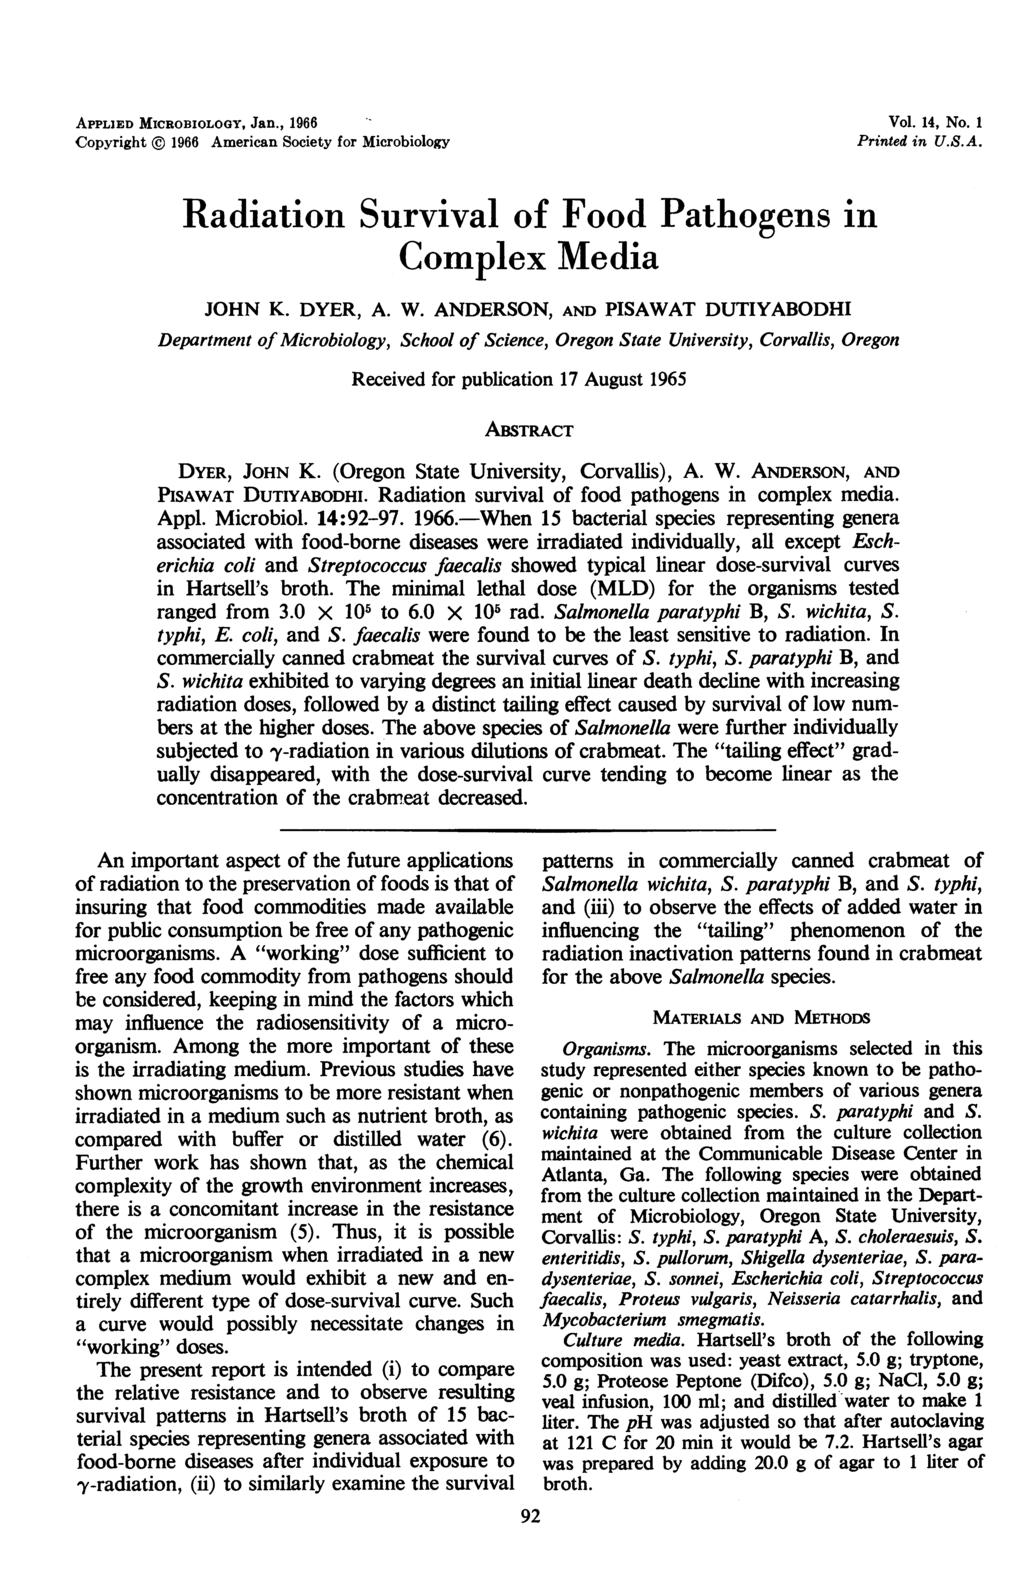 APPLIED MICROBIOLOGY, Jan., 1966 Vol. 14, No. 1 Copyright 1966 American Society for Microbiology Printed in U.S.A. Radiation Survival of Food Pathogens in Complex Media JOHN K. DYER, A. W.